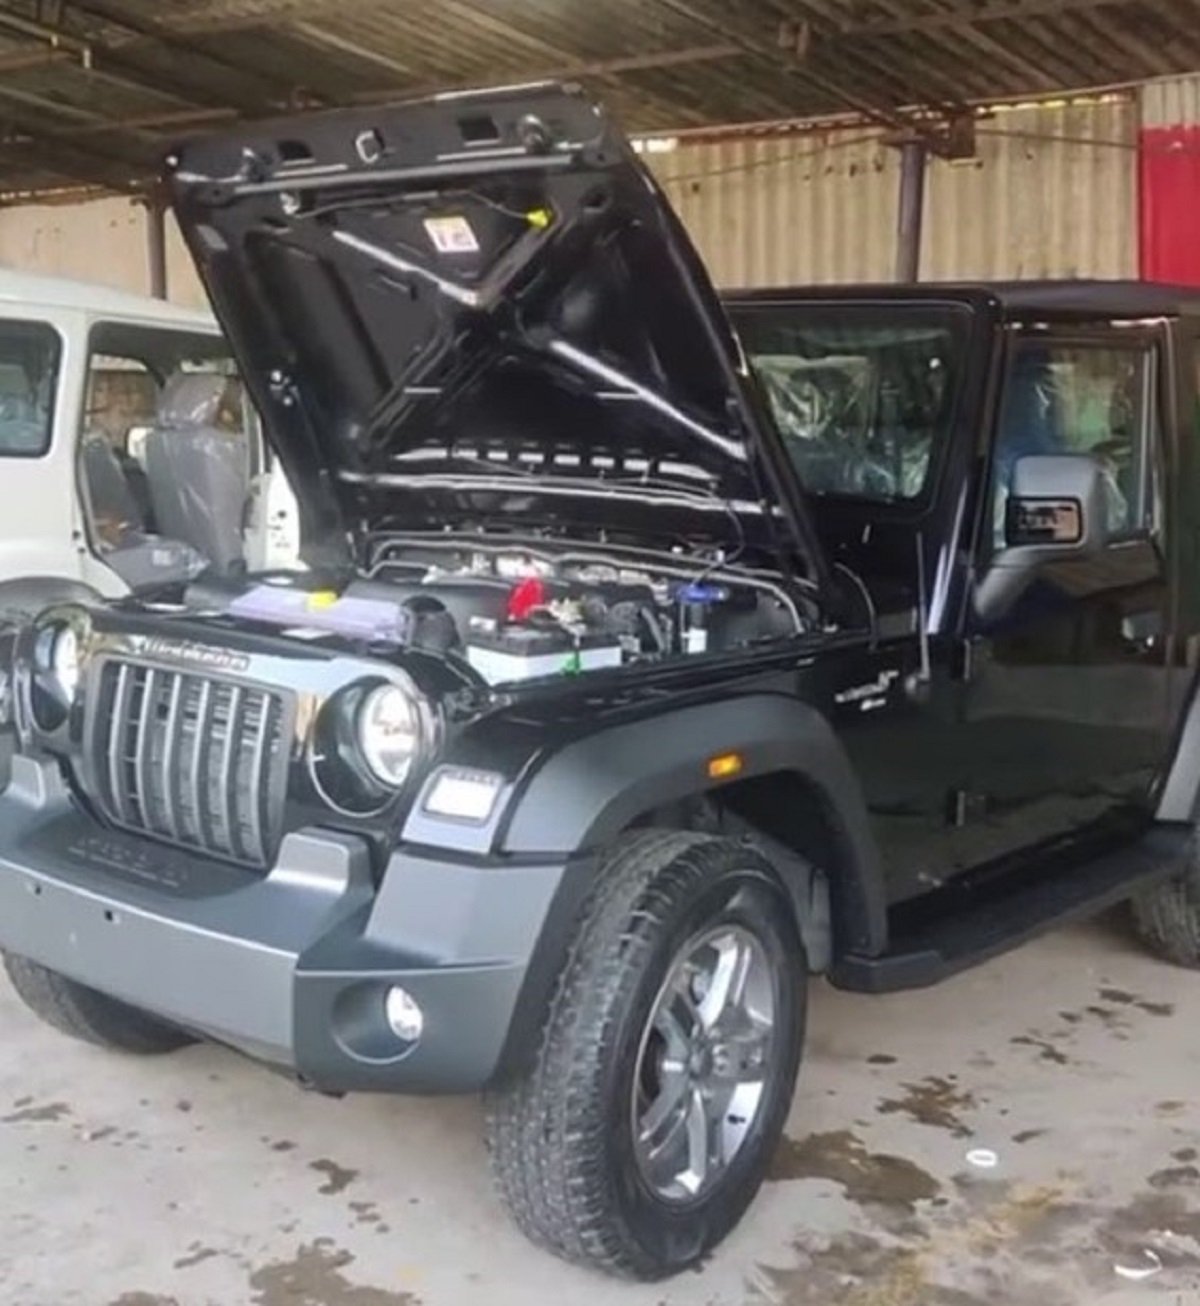 This New Mahindra Thar Gets Aftermarket Automatic Bonnet - VIDEO